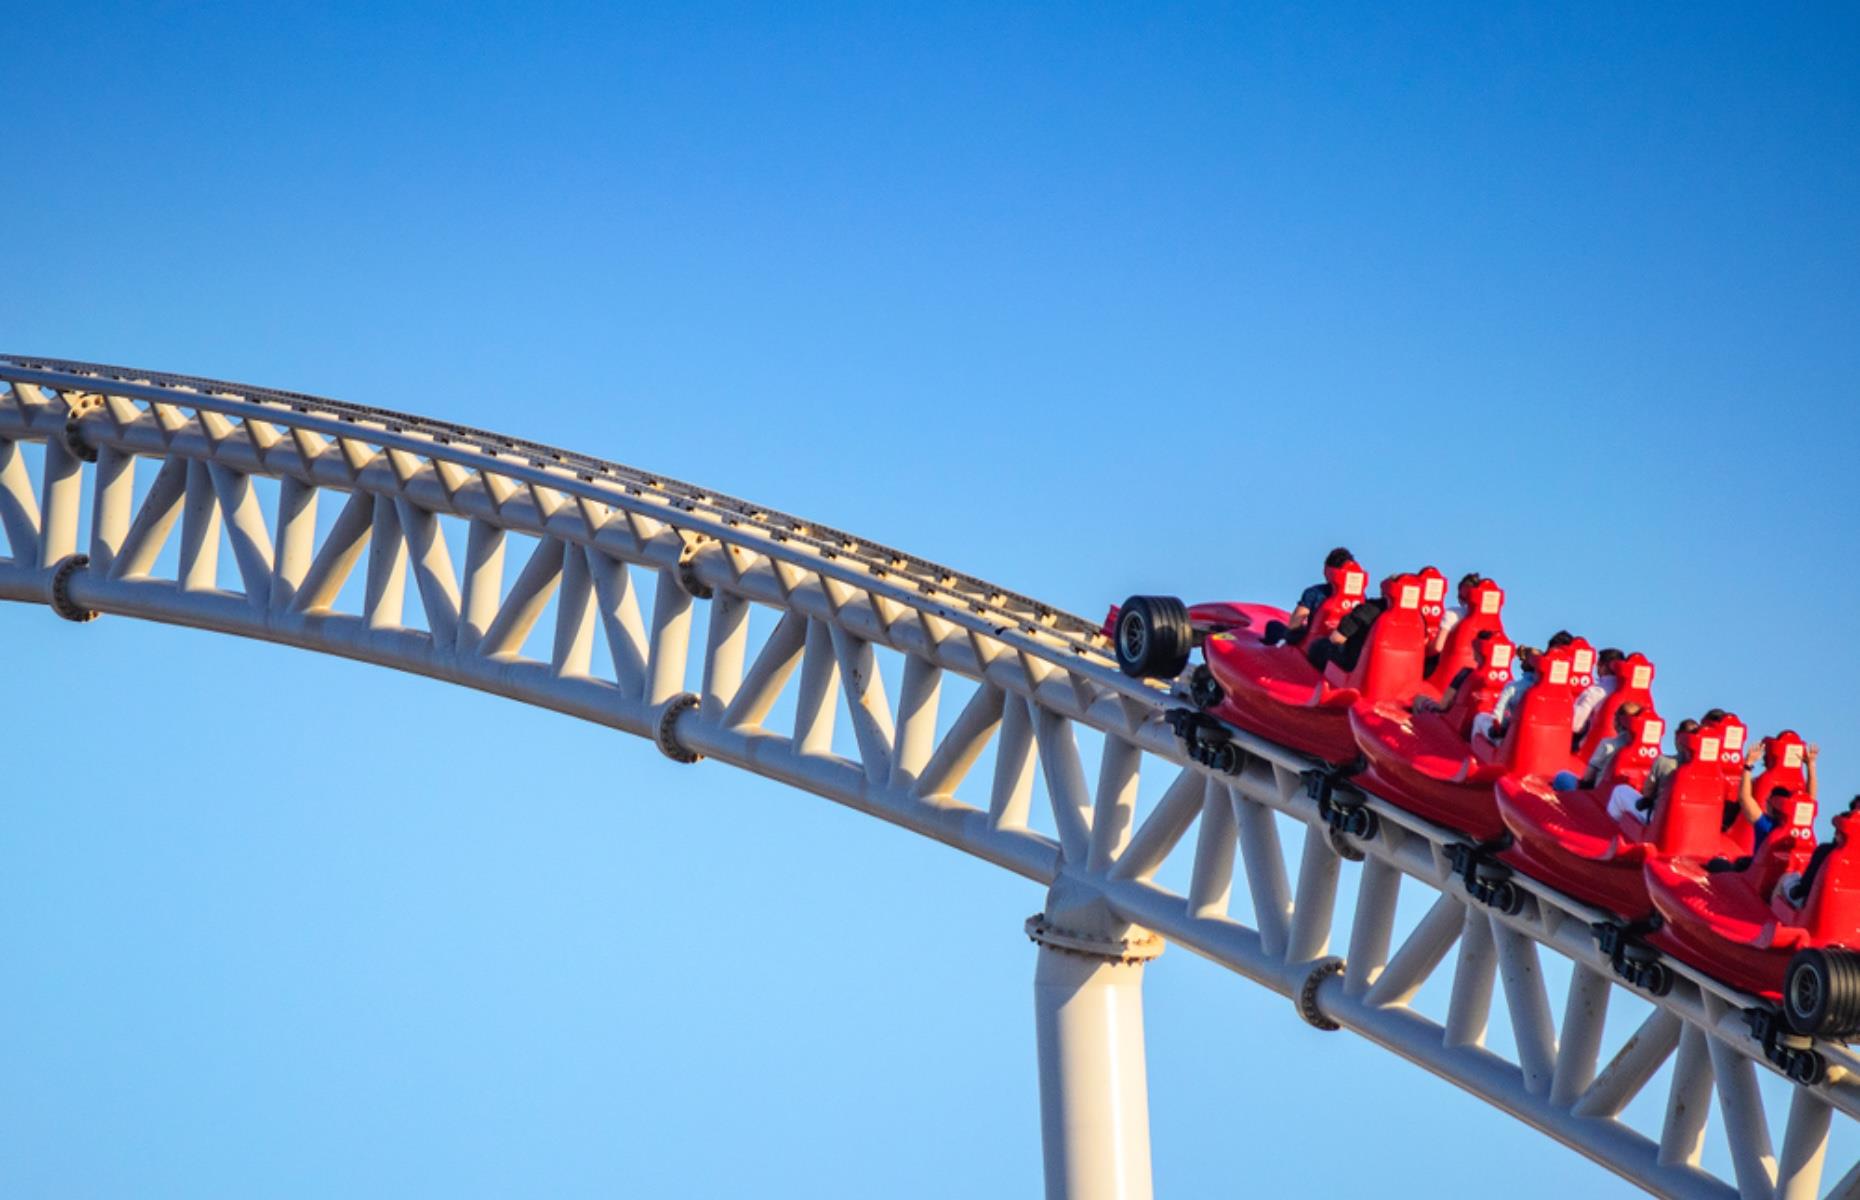 <p>The fastest roller coaster in the world right now has a mind-bending top speed of 149.1 miles per hour. We're dizzy just thinking about it! </p>  <p>The hydraulic launch system gets to its top speed quickly too – in 4.9 seconds, to be precise. It goes so fast that passengers have to wear protective glasses.</p>  <p>The train carriages are shaped like Formula One Ferrari racing cars and the track itself is full of tight turns and drops, reminiscent of a Grand Prix course.</p>